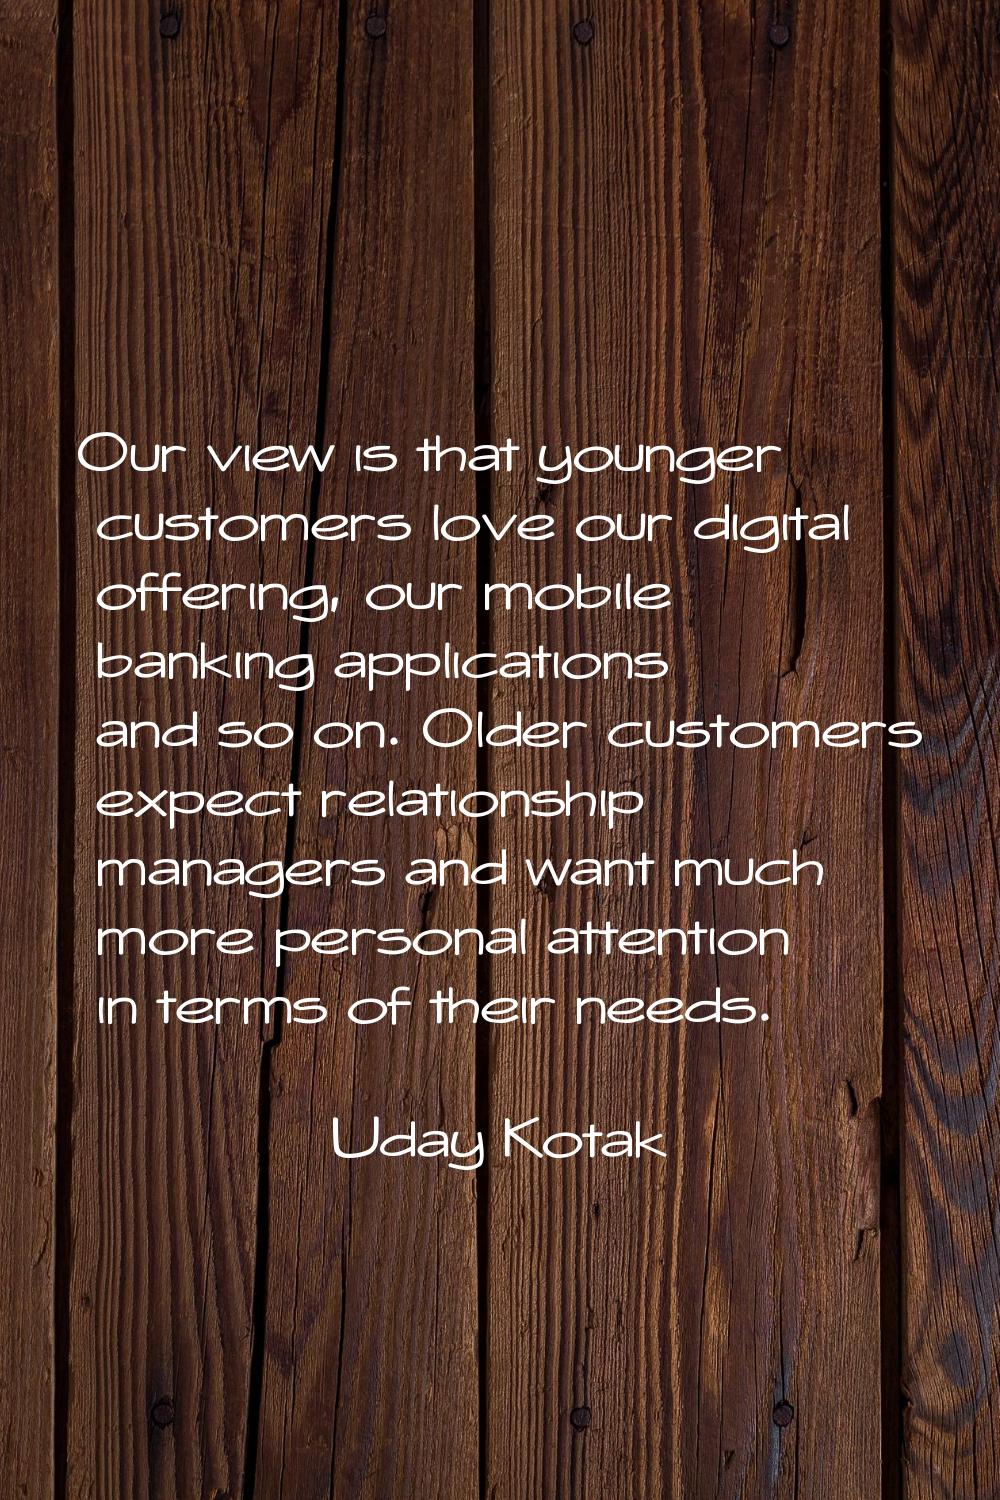 Our view is that younger customers love our digital offering, our mobile banking applications and s